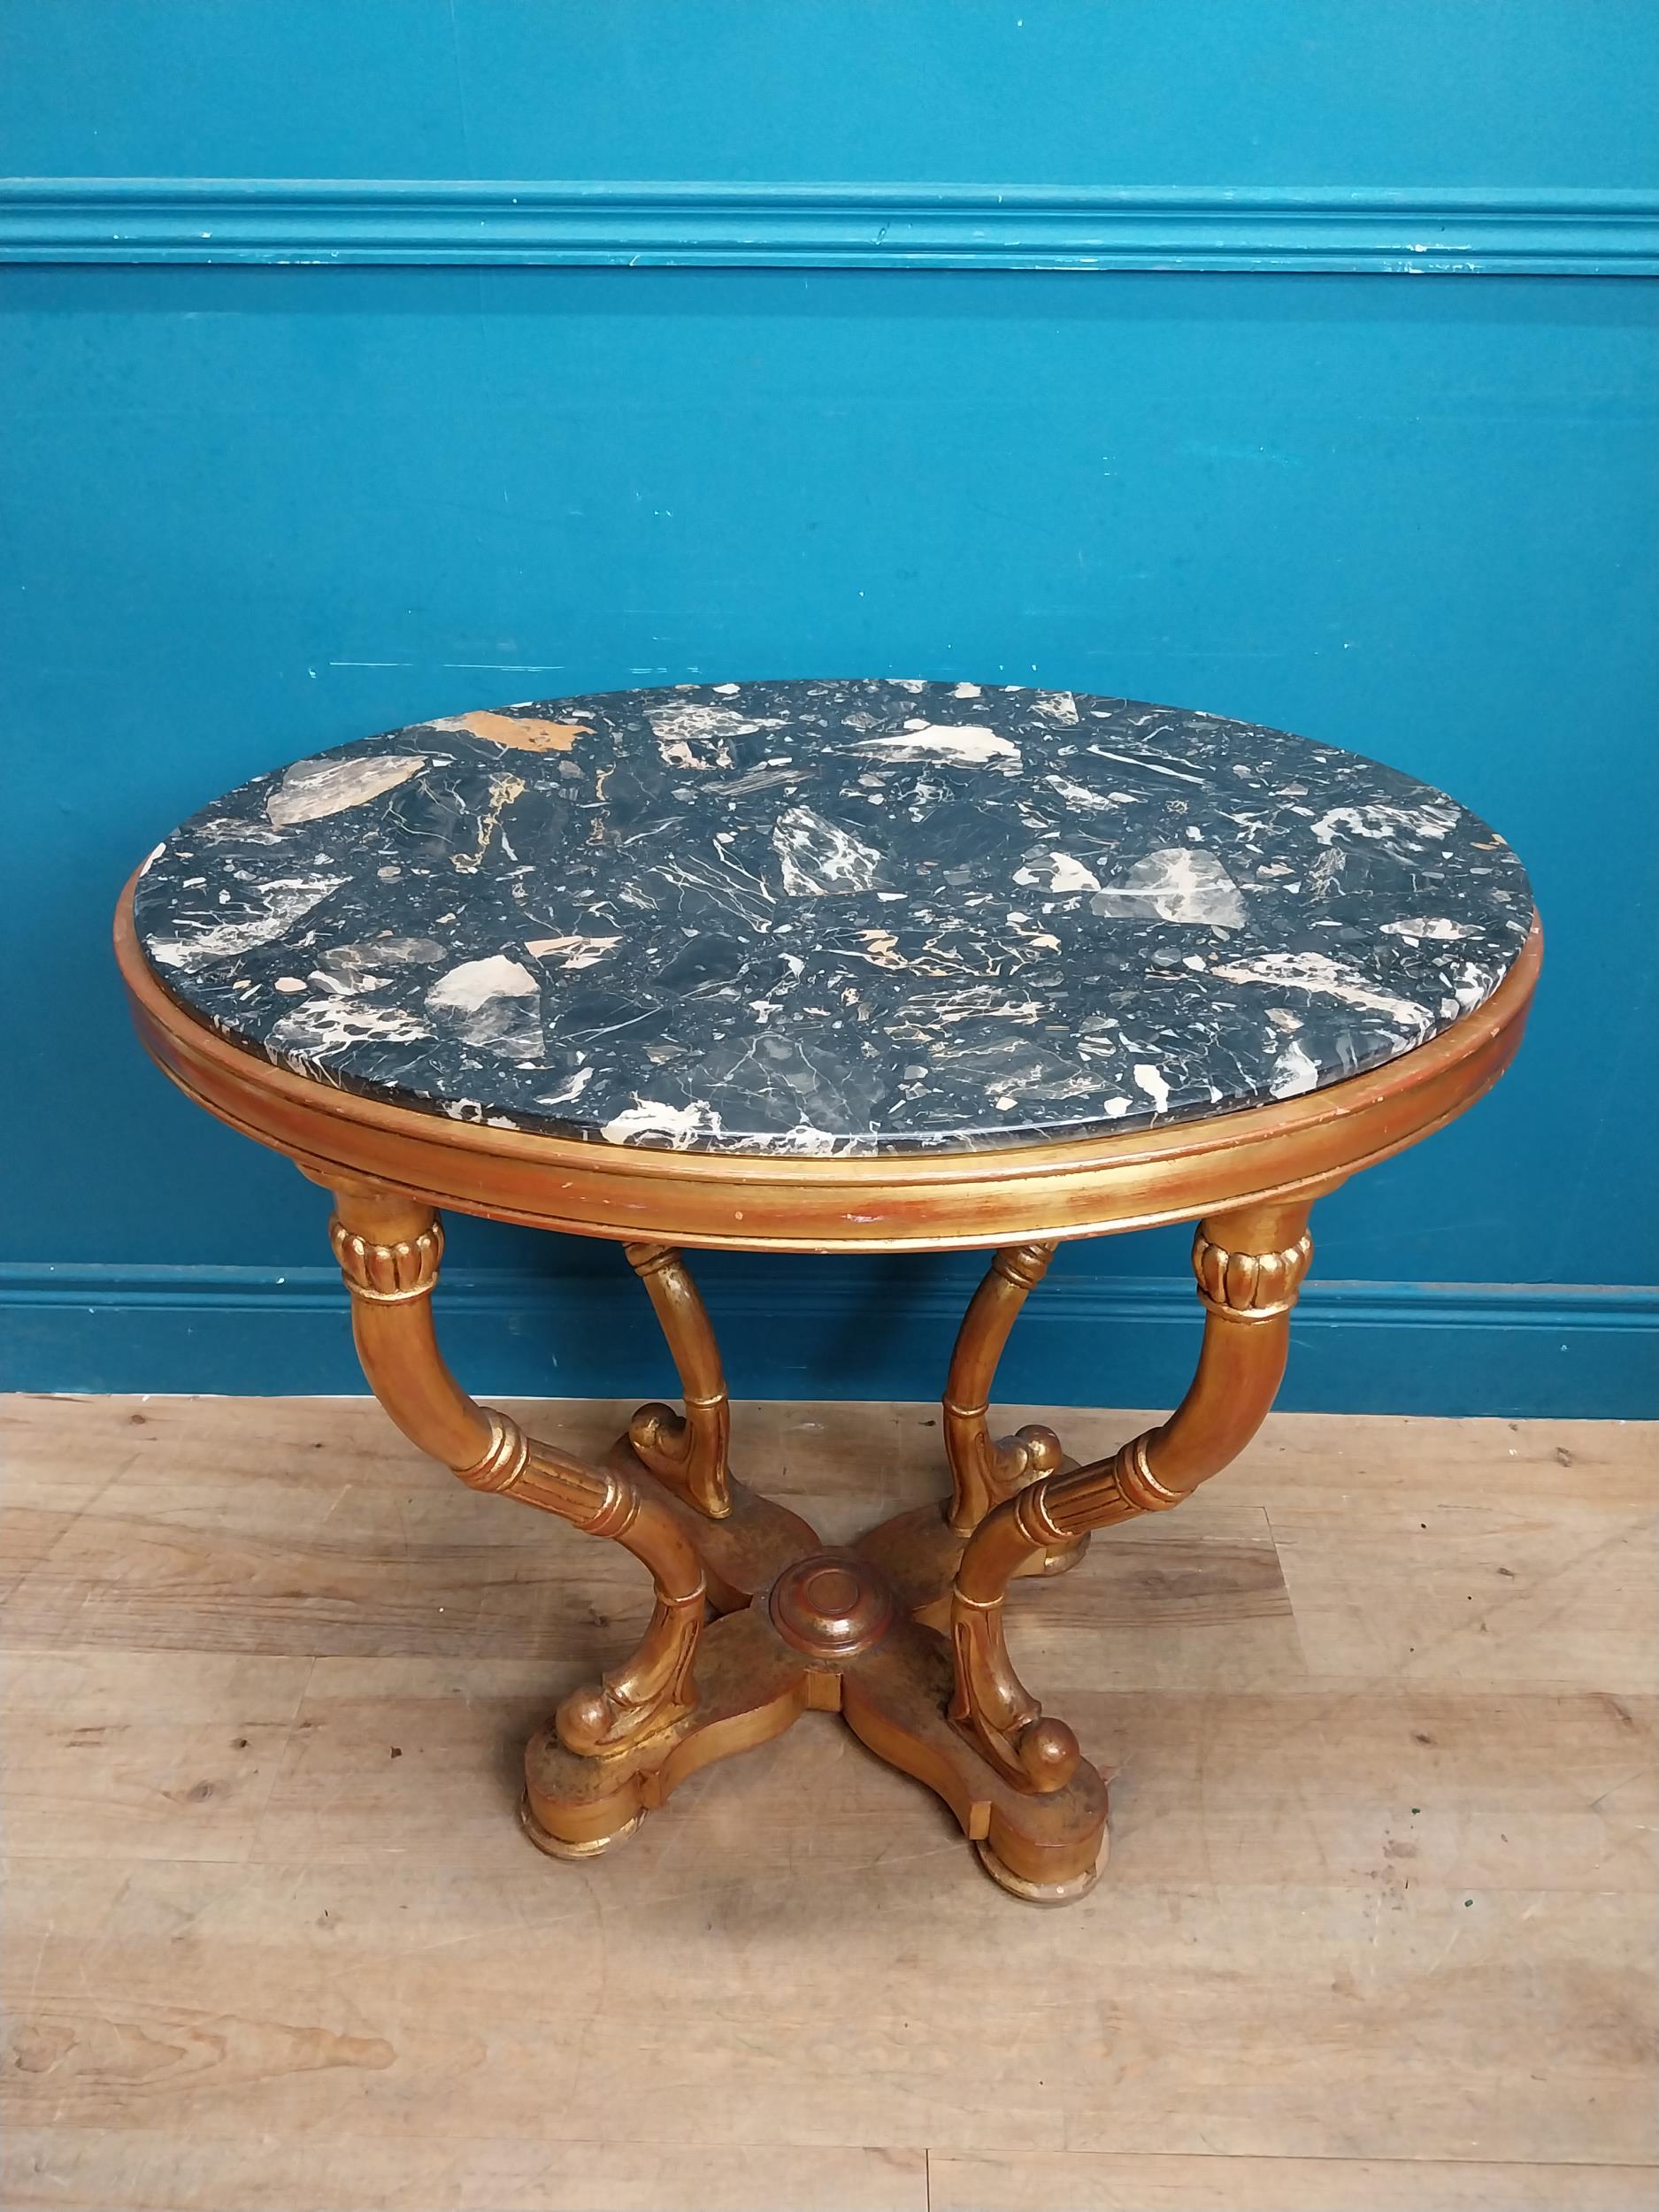 Decorative giltwood centre table with marble top raised on four shaped legs and x-frame platform - Image 2 of 7